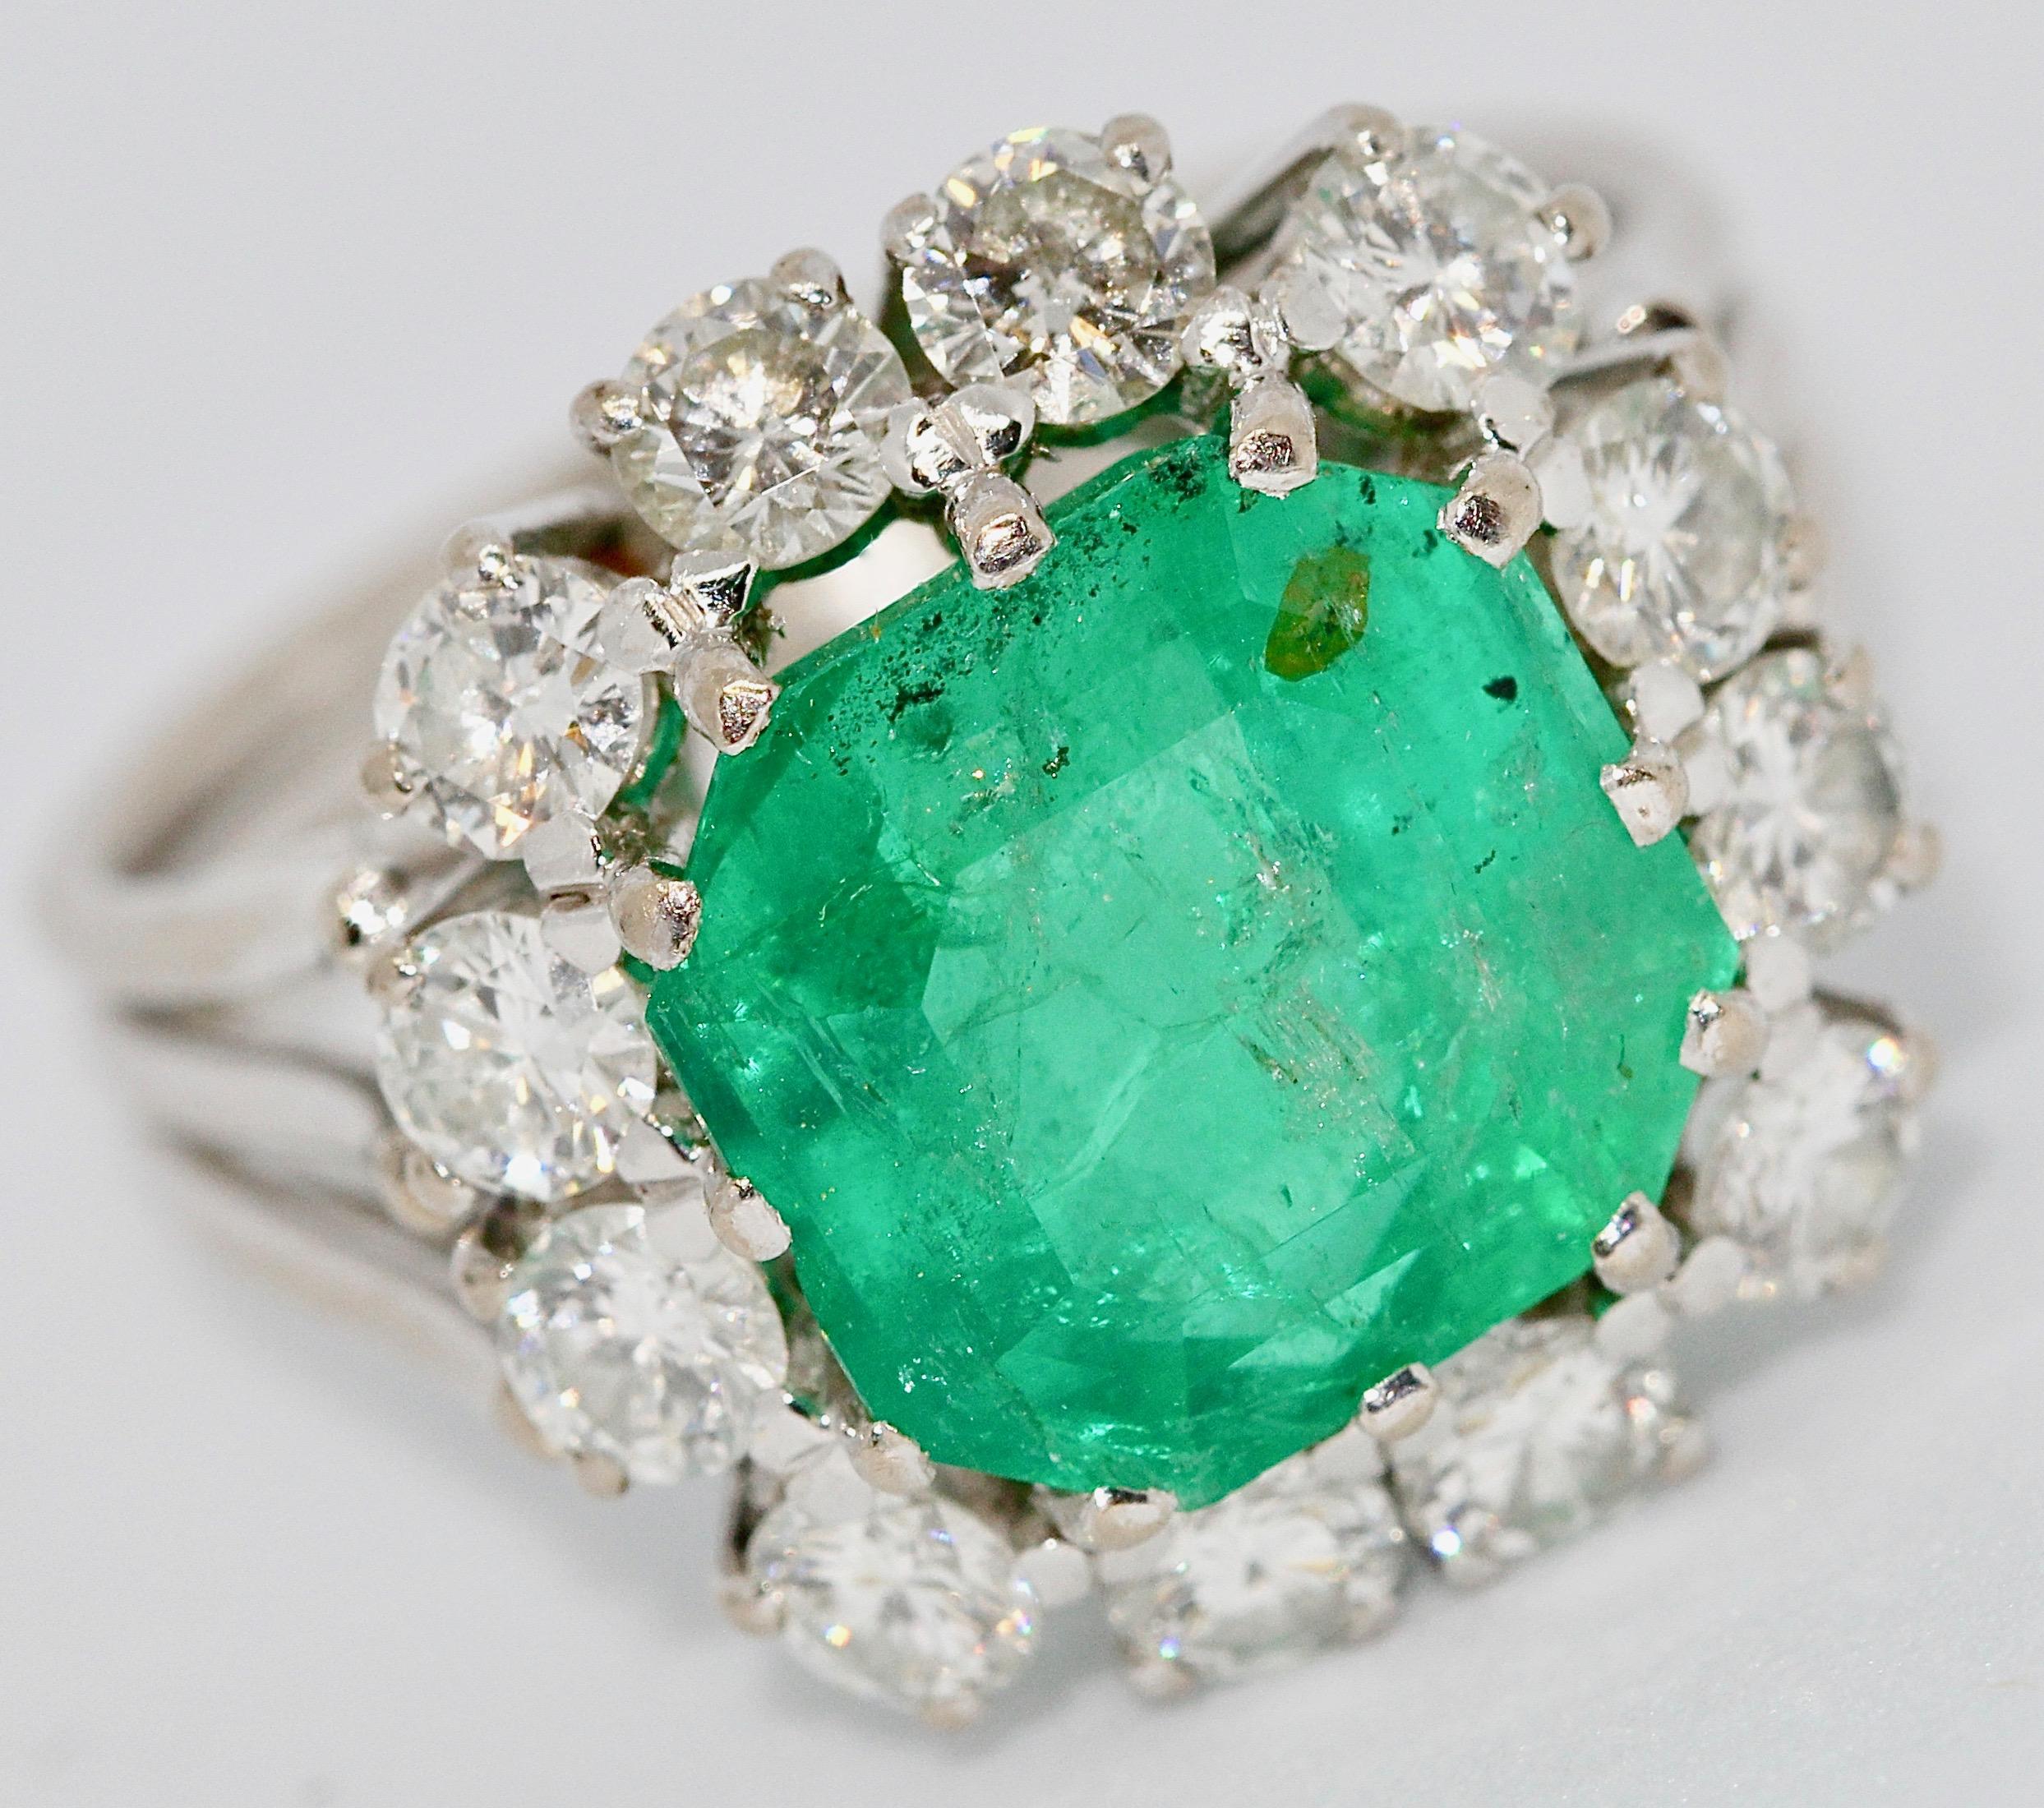 Luxurious 18 Karat white gold ring with large emerald and 12 diamonds

The diamonds are of very good quality and each have a size of minimum 0.1 ct.
Total carat diamonds min. 1.2 ct.

Emerald is natural and untreated. The emerald has visible